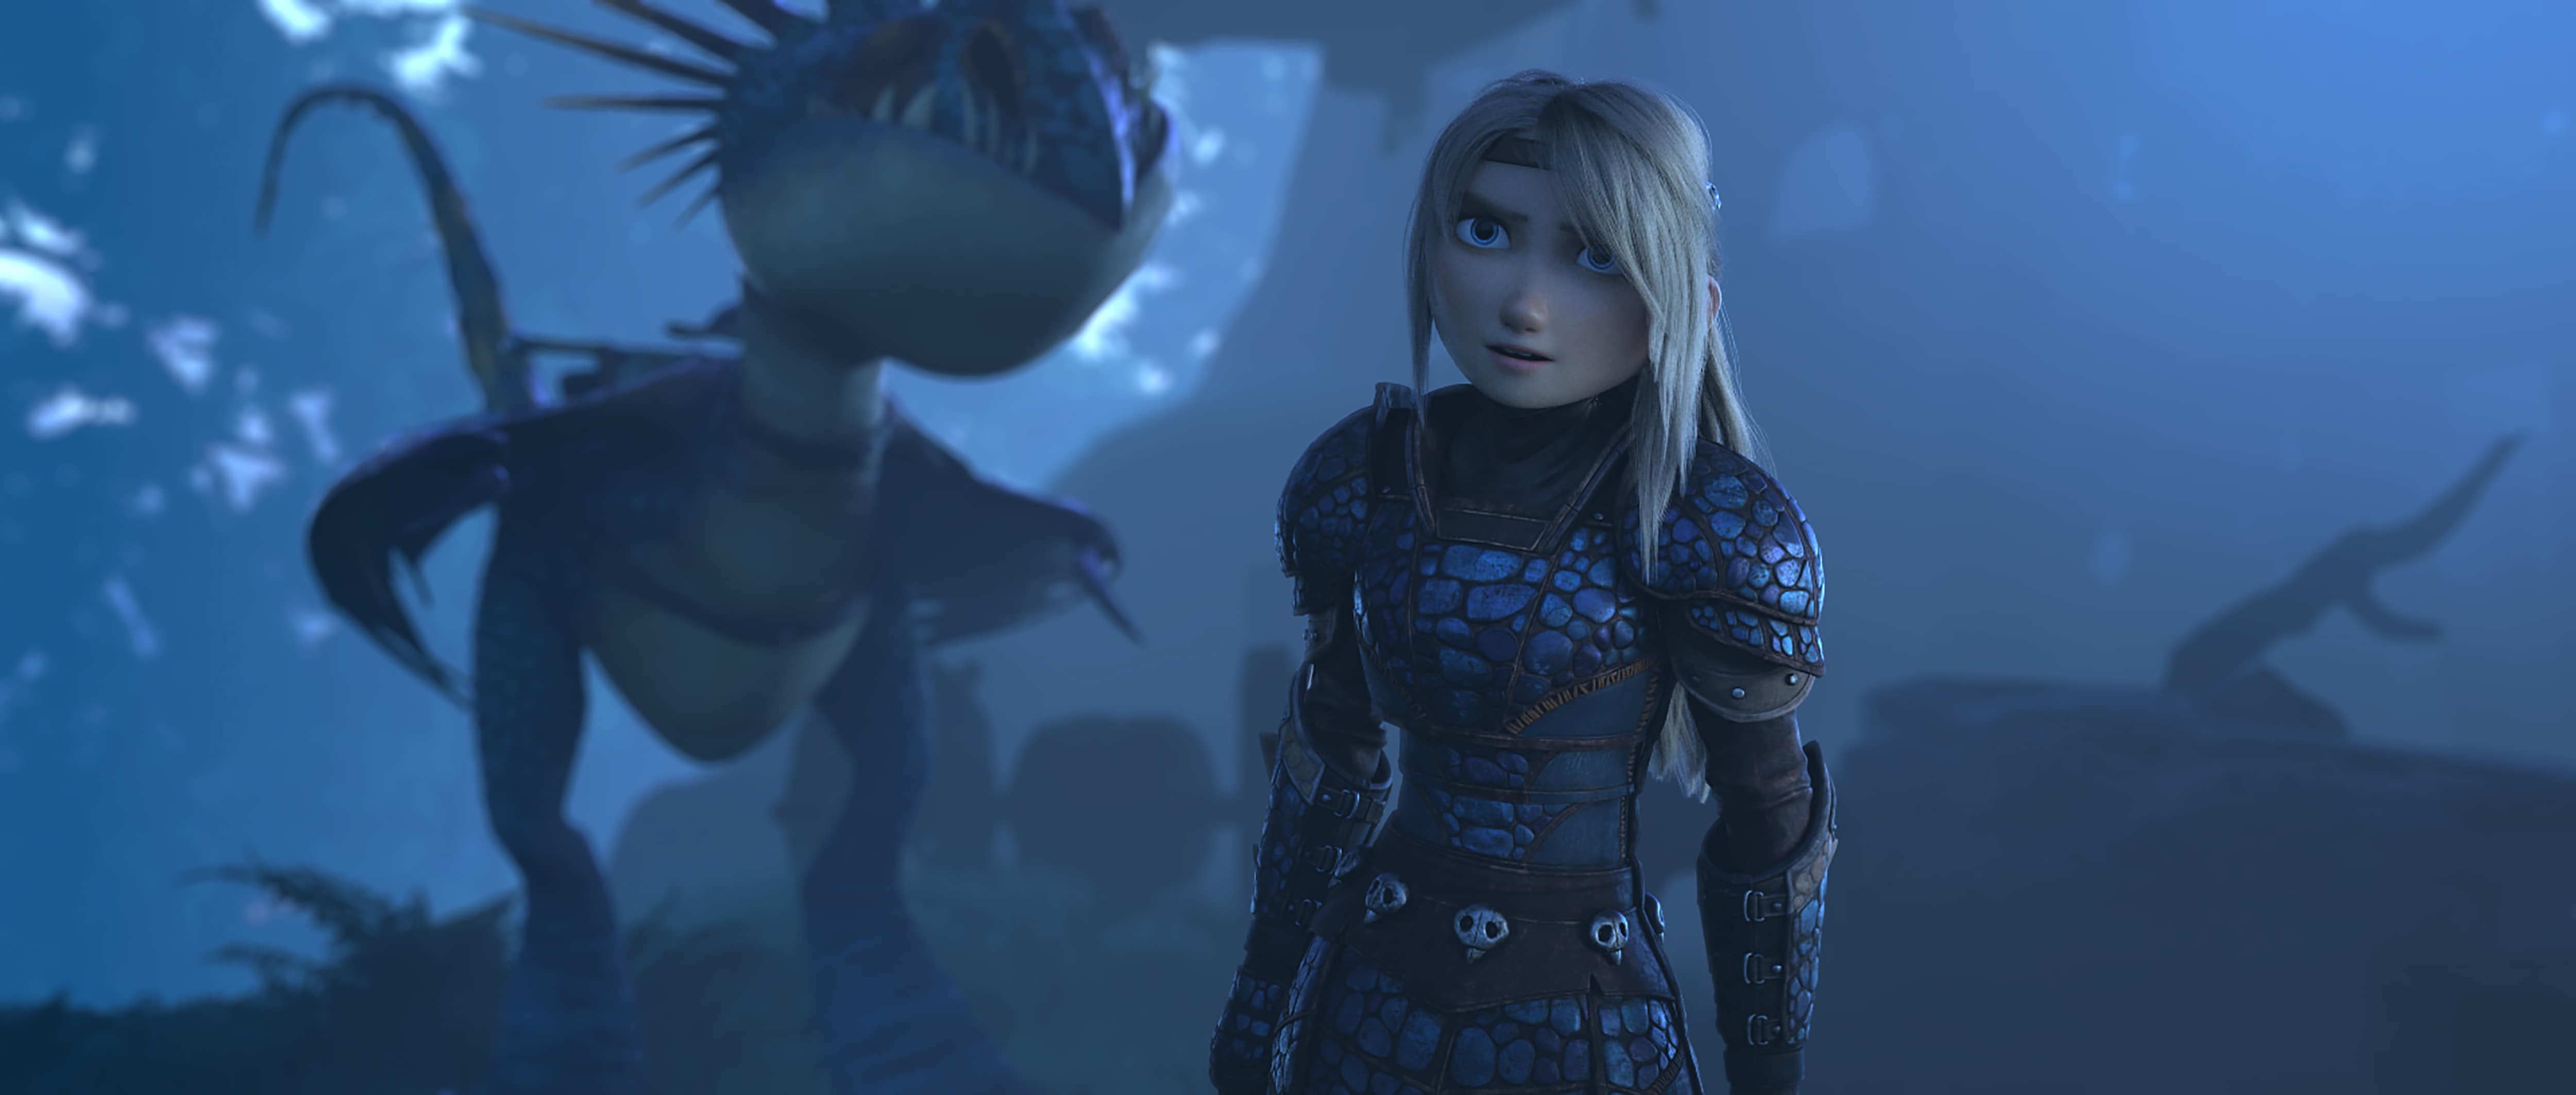 How To Train Your Dragon The Hidden World Blu-ray